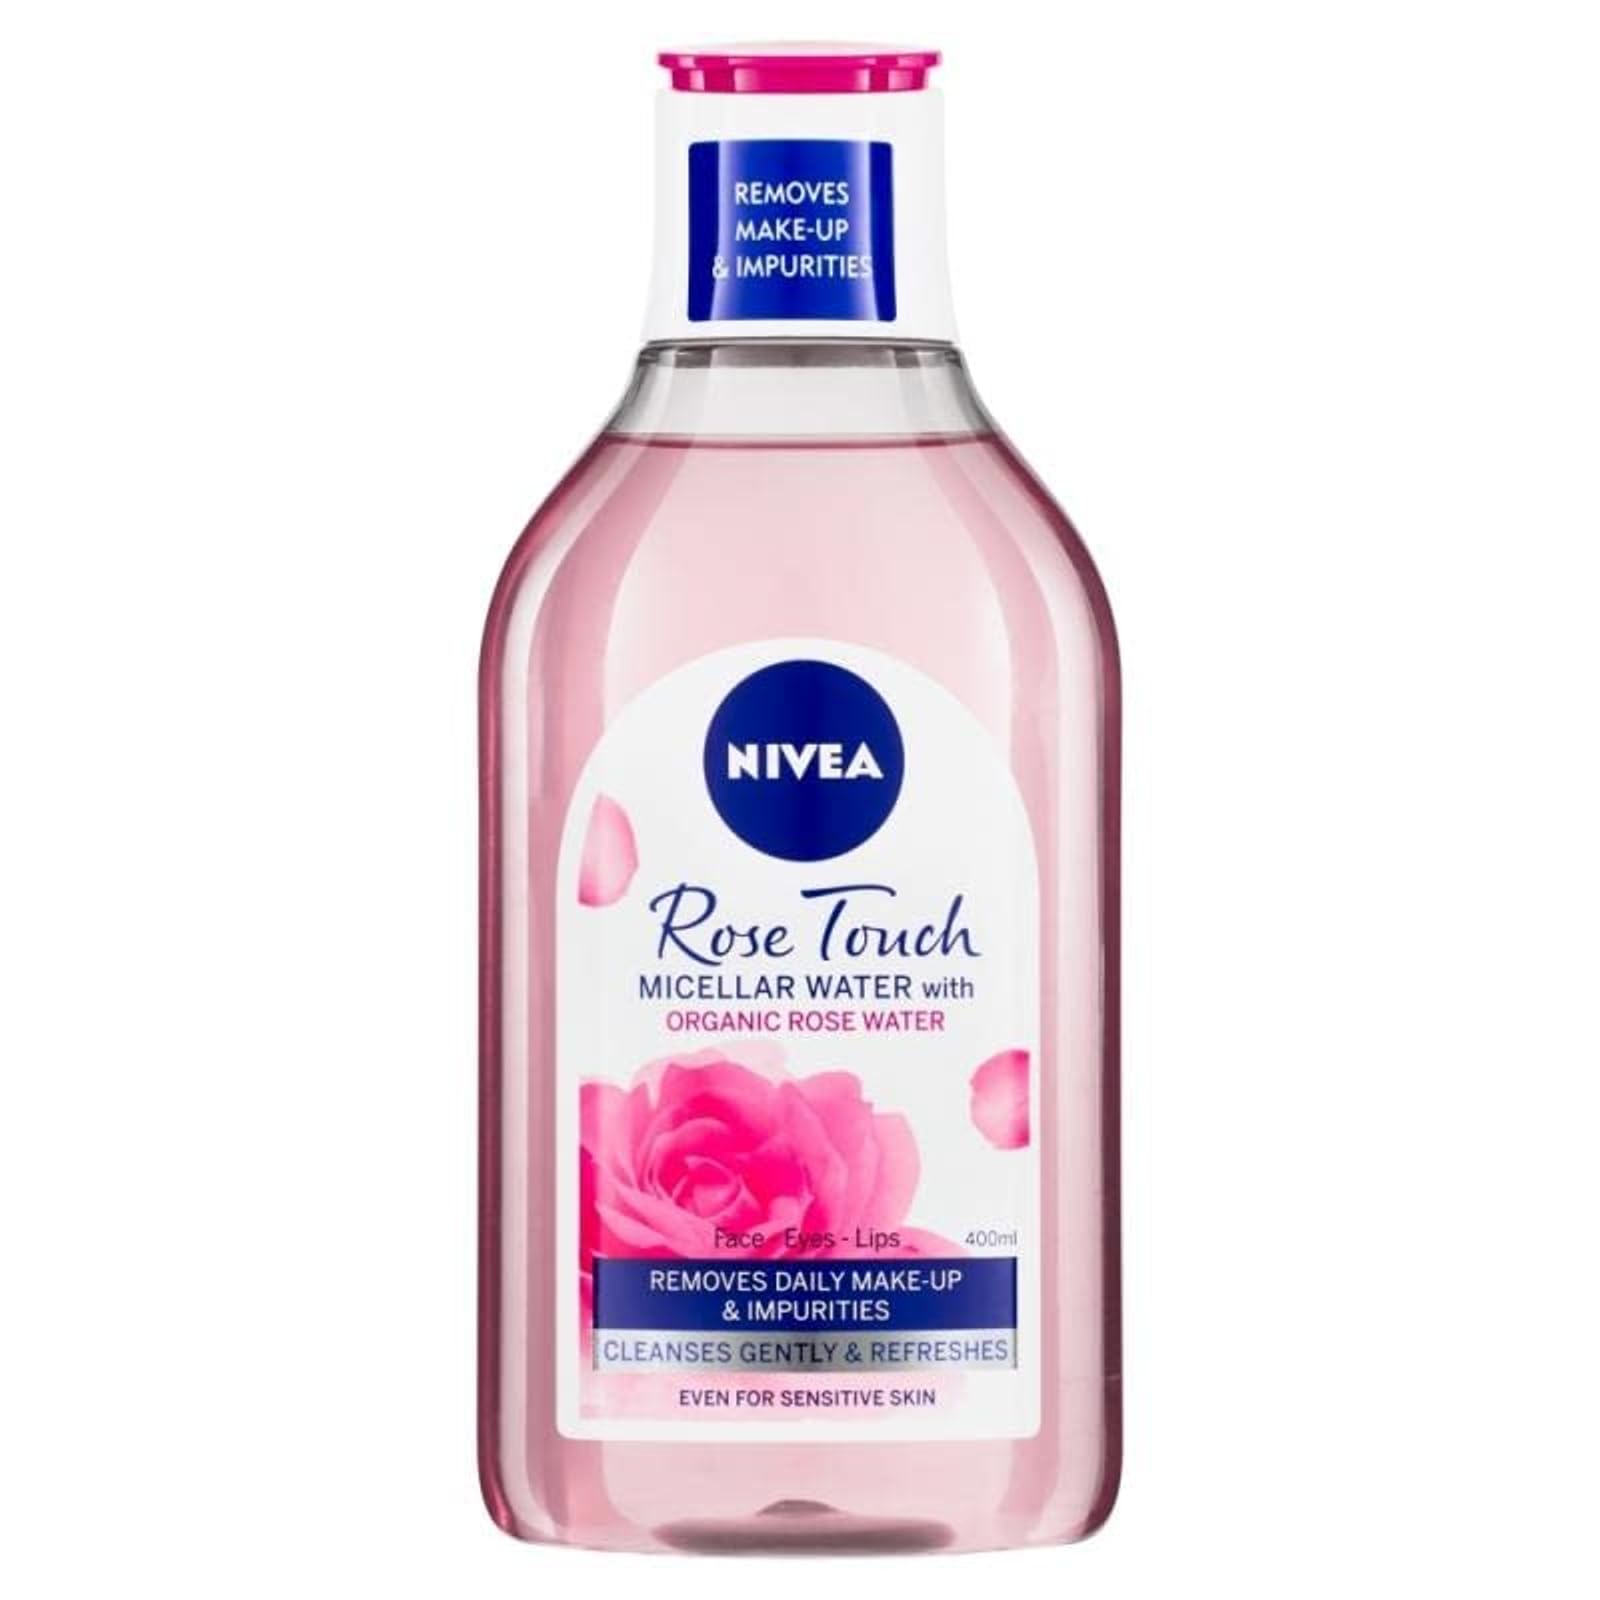 Nivea Micellar Water Rose Touch Make Up Remover Cleanses Hydration Skin Pack of 2 (x 400ml) Formula with Organic Rose Water Effectively Removes Make-up and Dirt